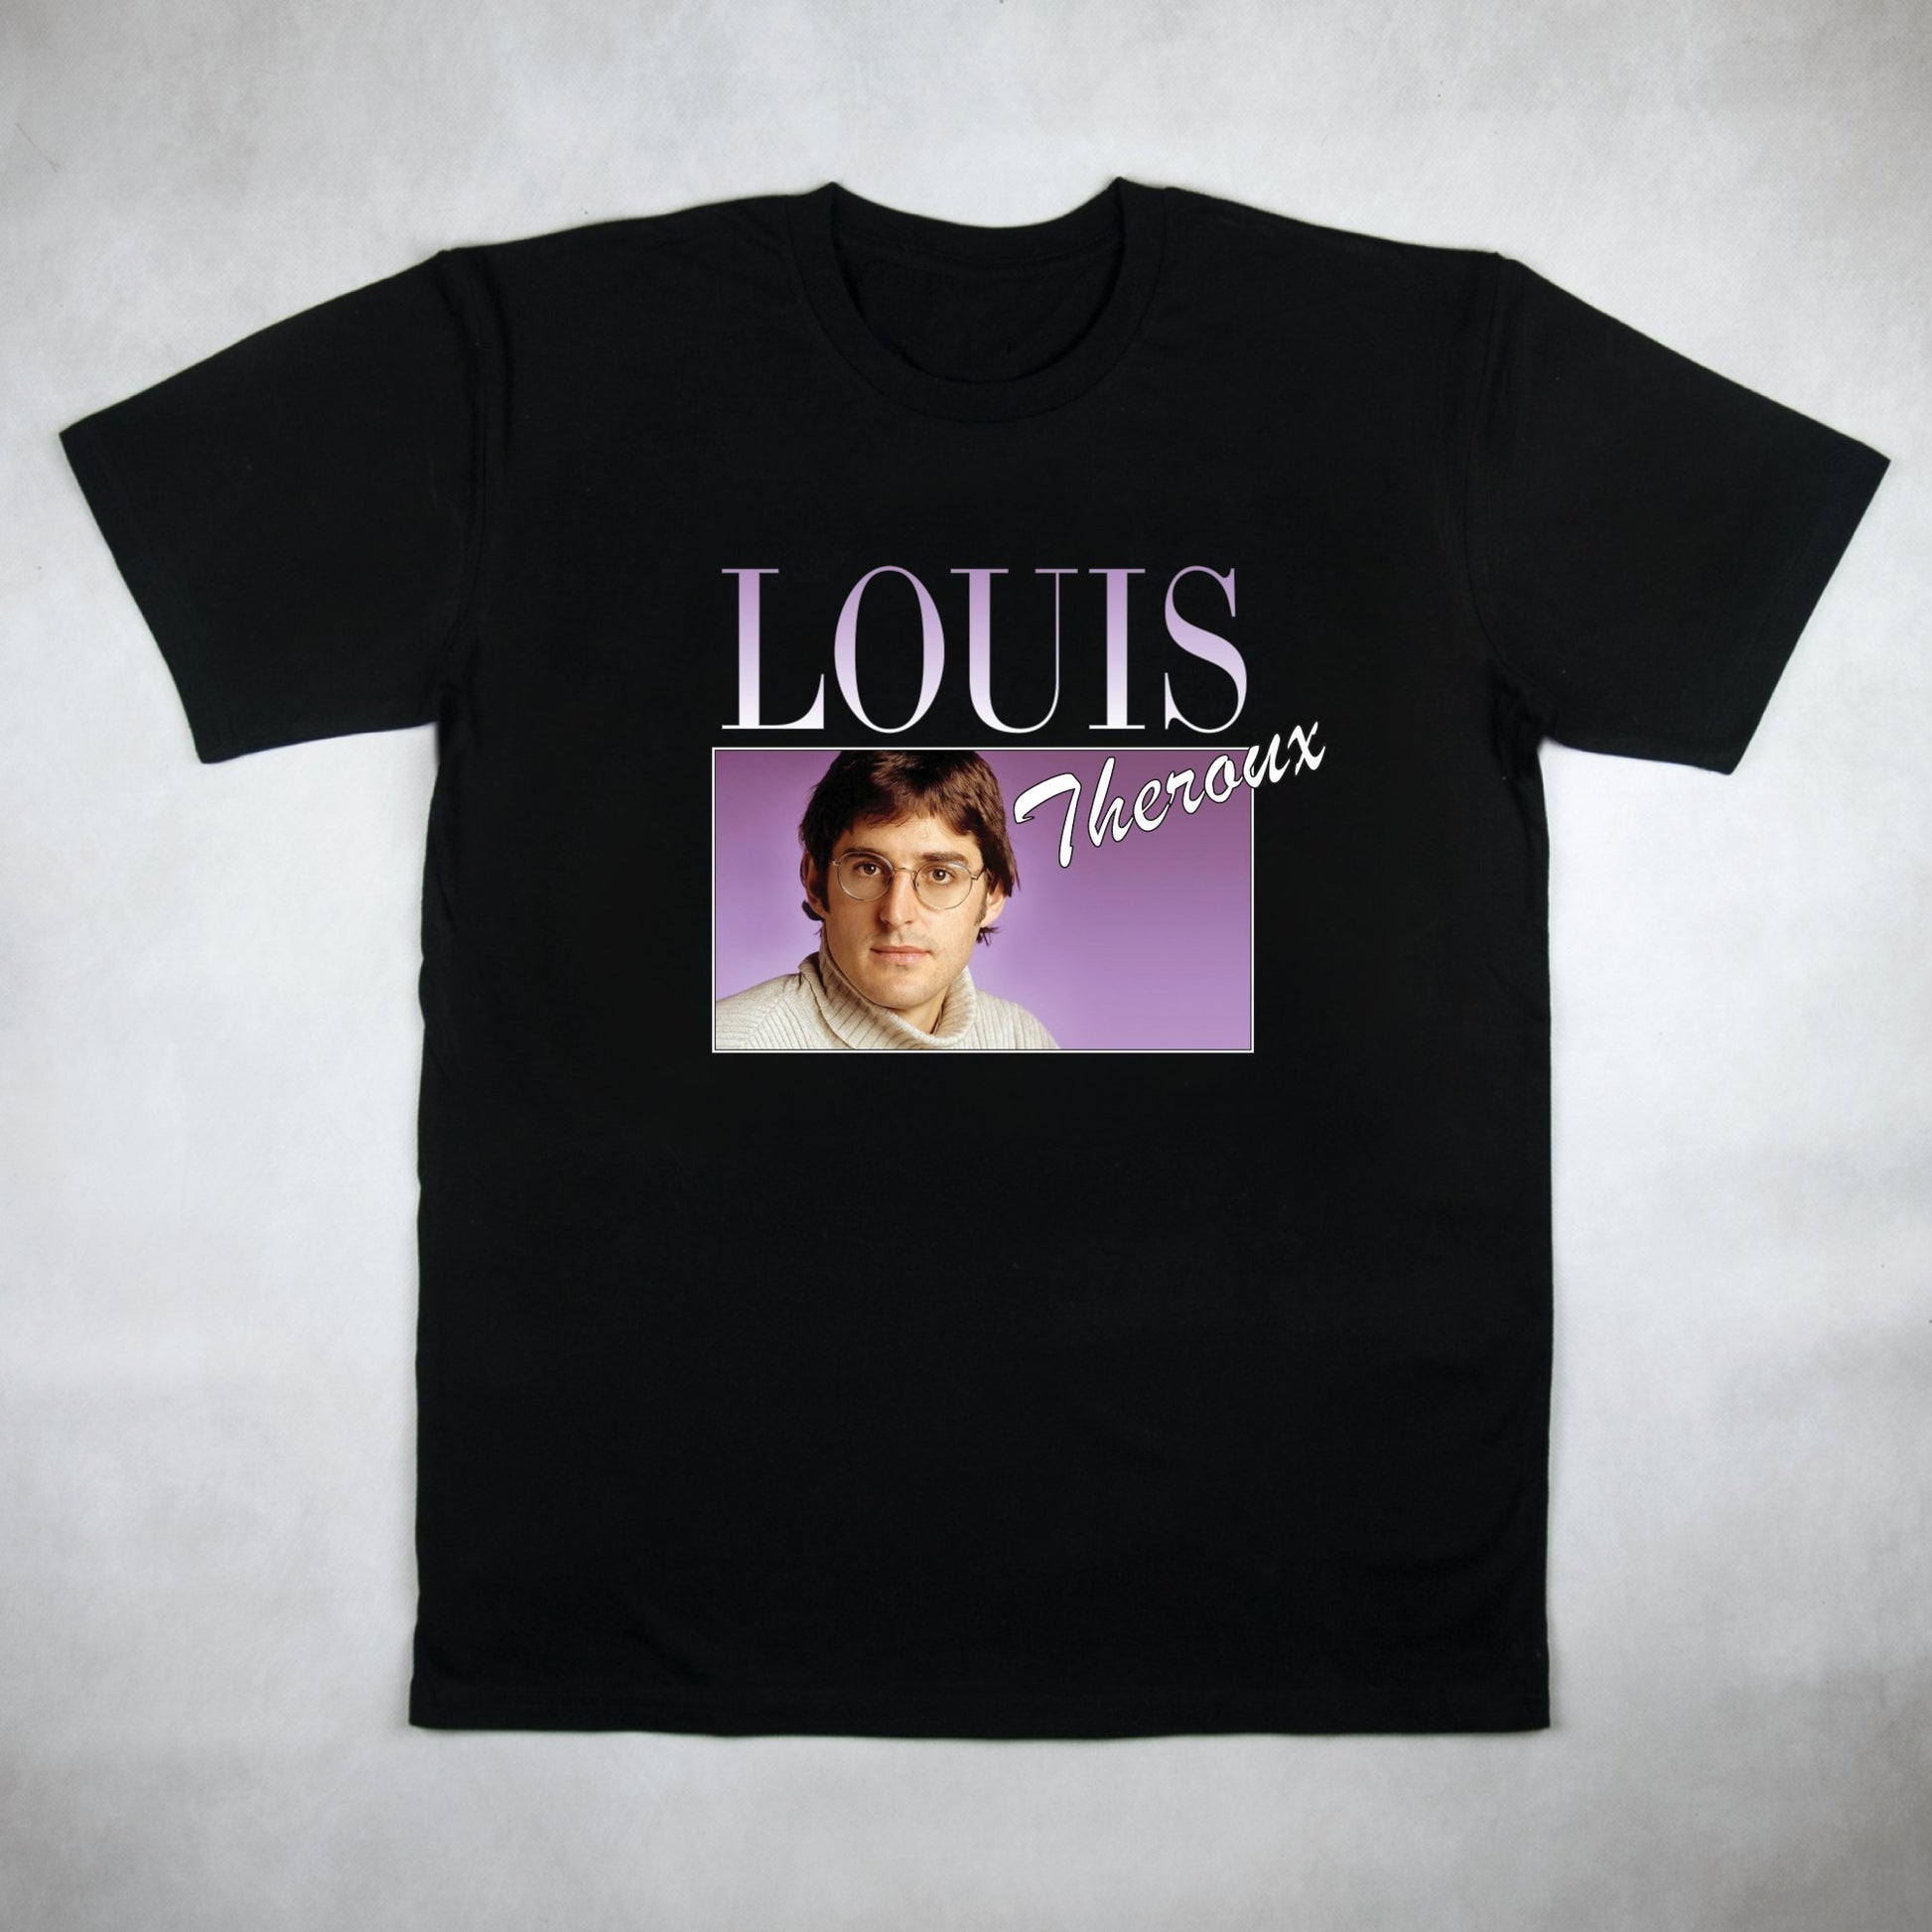 Classy Duds Short Sleeve T-Shirts S / Black / Standard Louis Theroux Commemorative Classic Tee